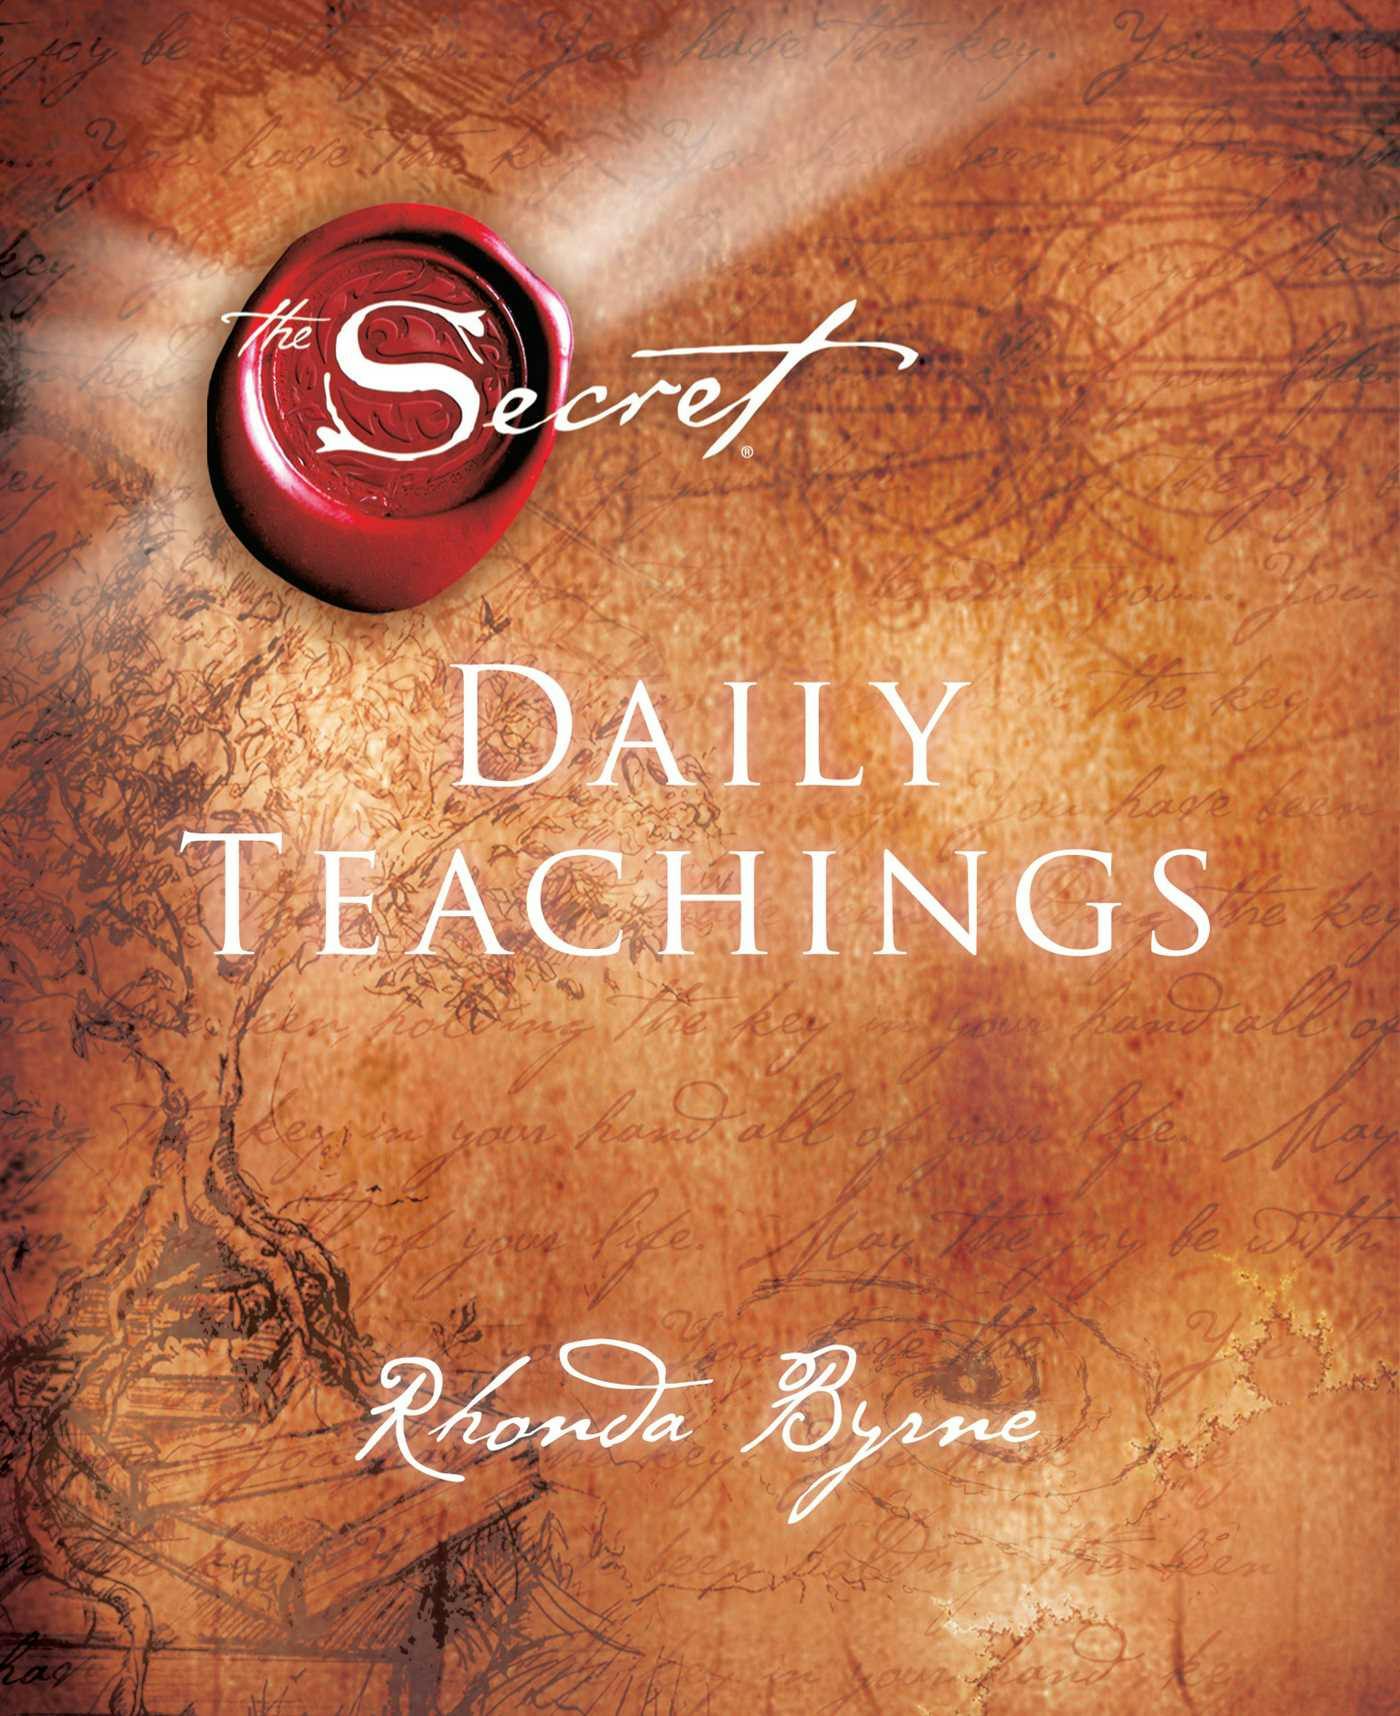 The Secret Daily Teachings - undefined